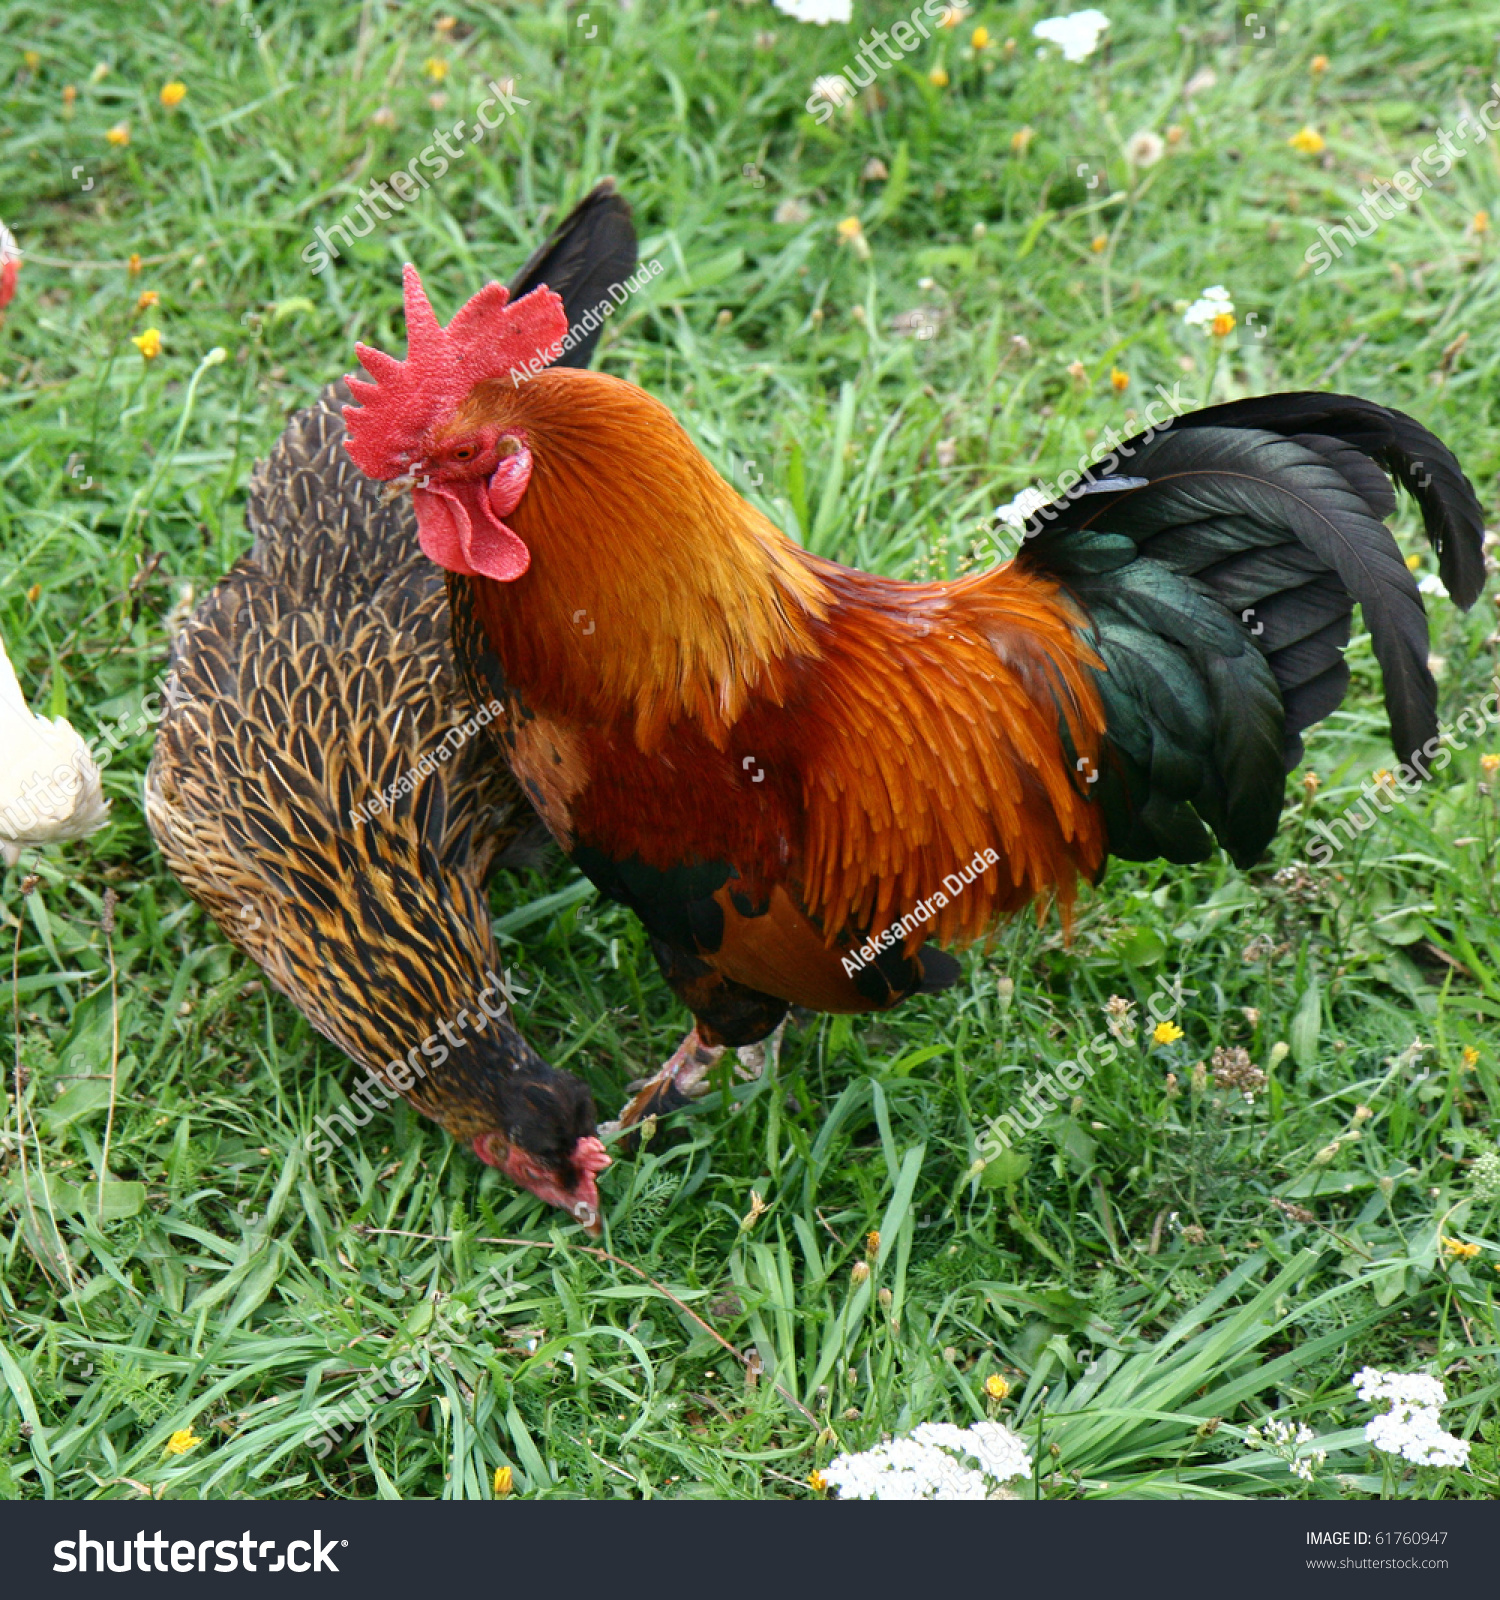 Cock and hen photo